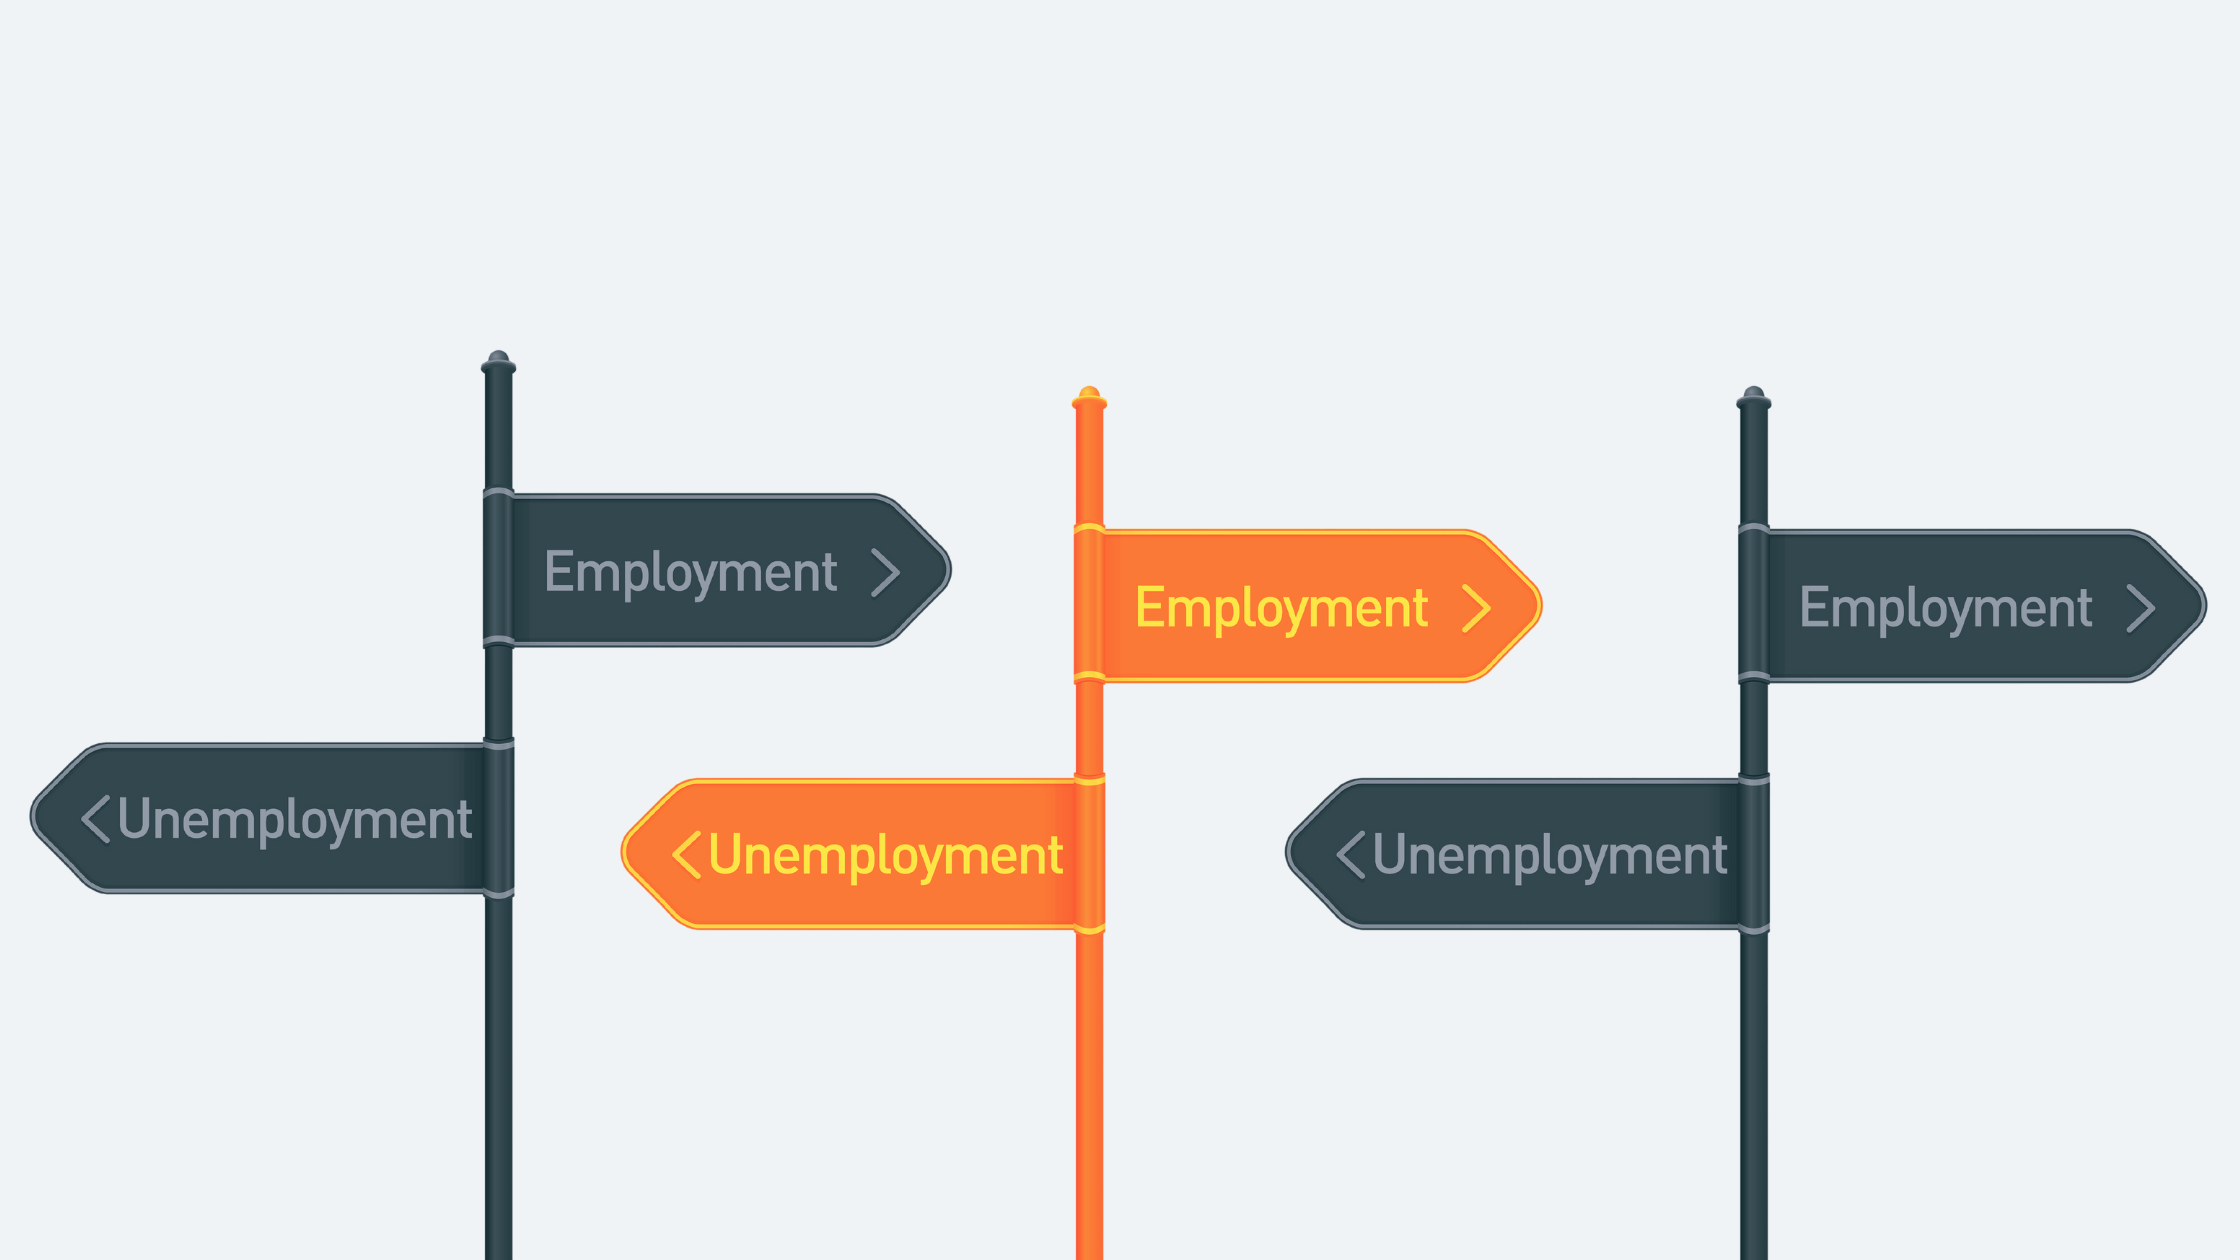 Analysing employment and unemployment trends